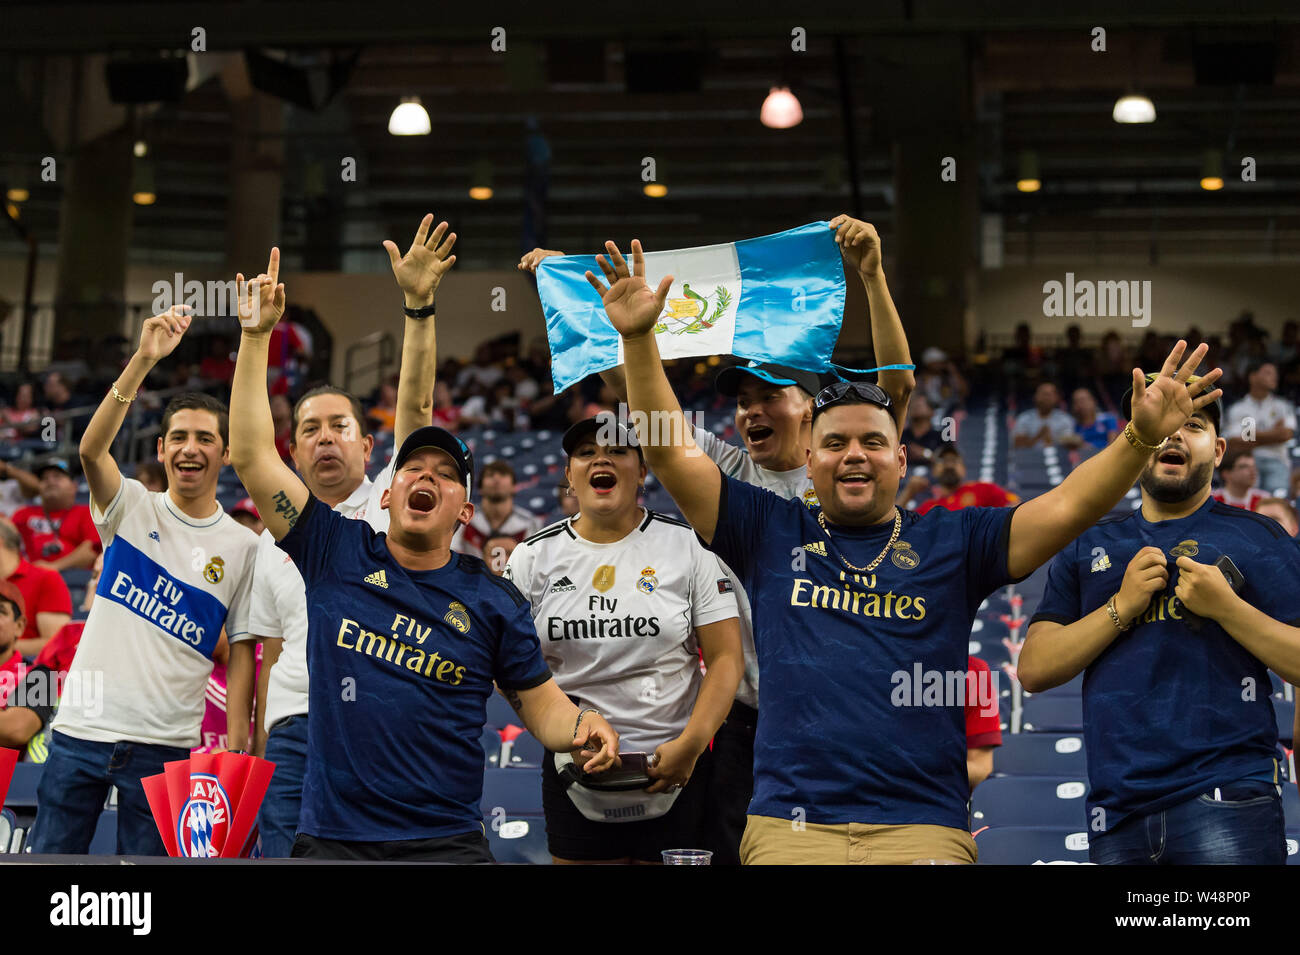 July 20, 2019: Real Madrid fans prior to the International Champions Cup  match between Real Madrid and Bayern Munich FC at NRG Stadium in Houston,  Texas The score at the half is